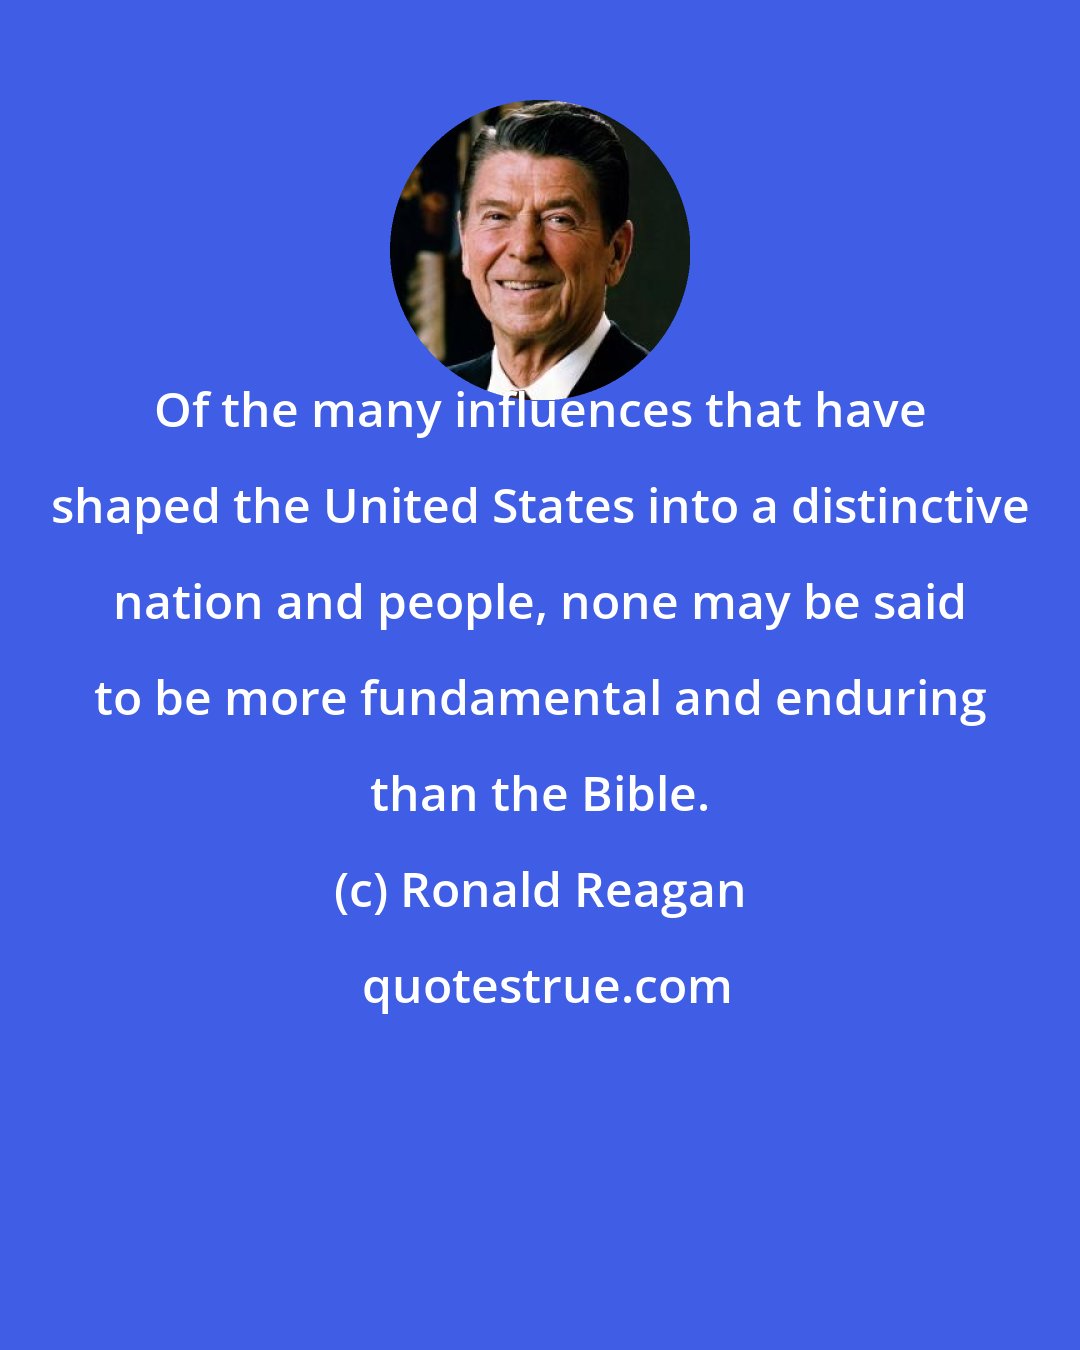 Ronald Reagan: Of the many influences that have shaped the United States into a distinctive nation and people, none may be said to be more fundamental and enduring than the Bible.